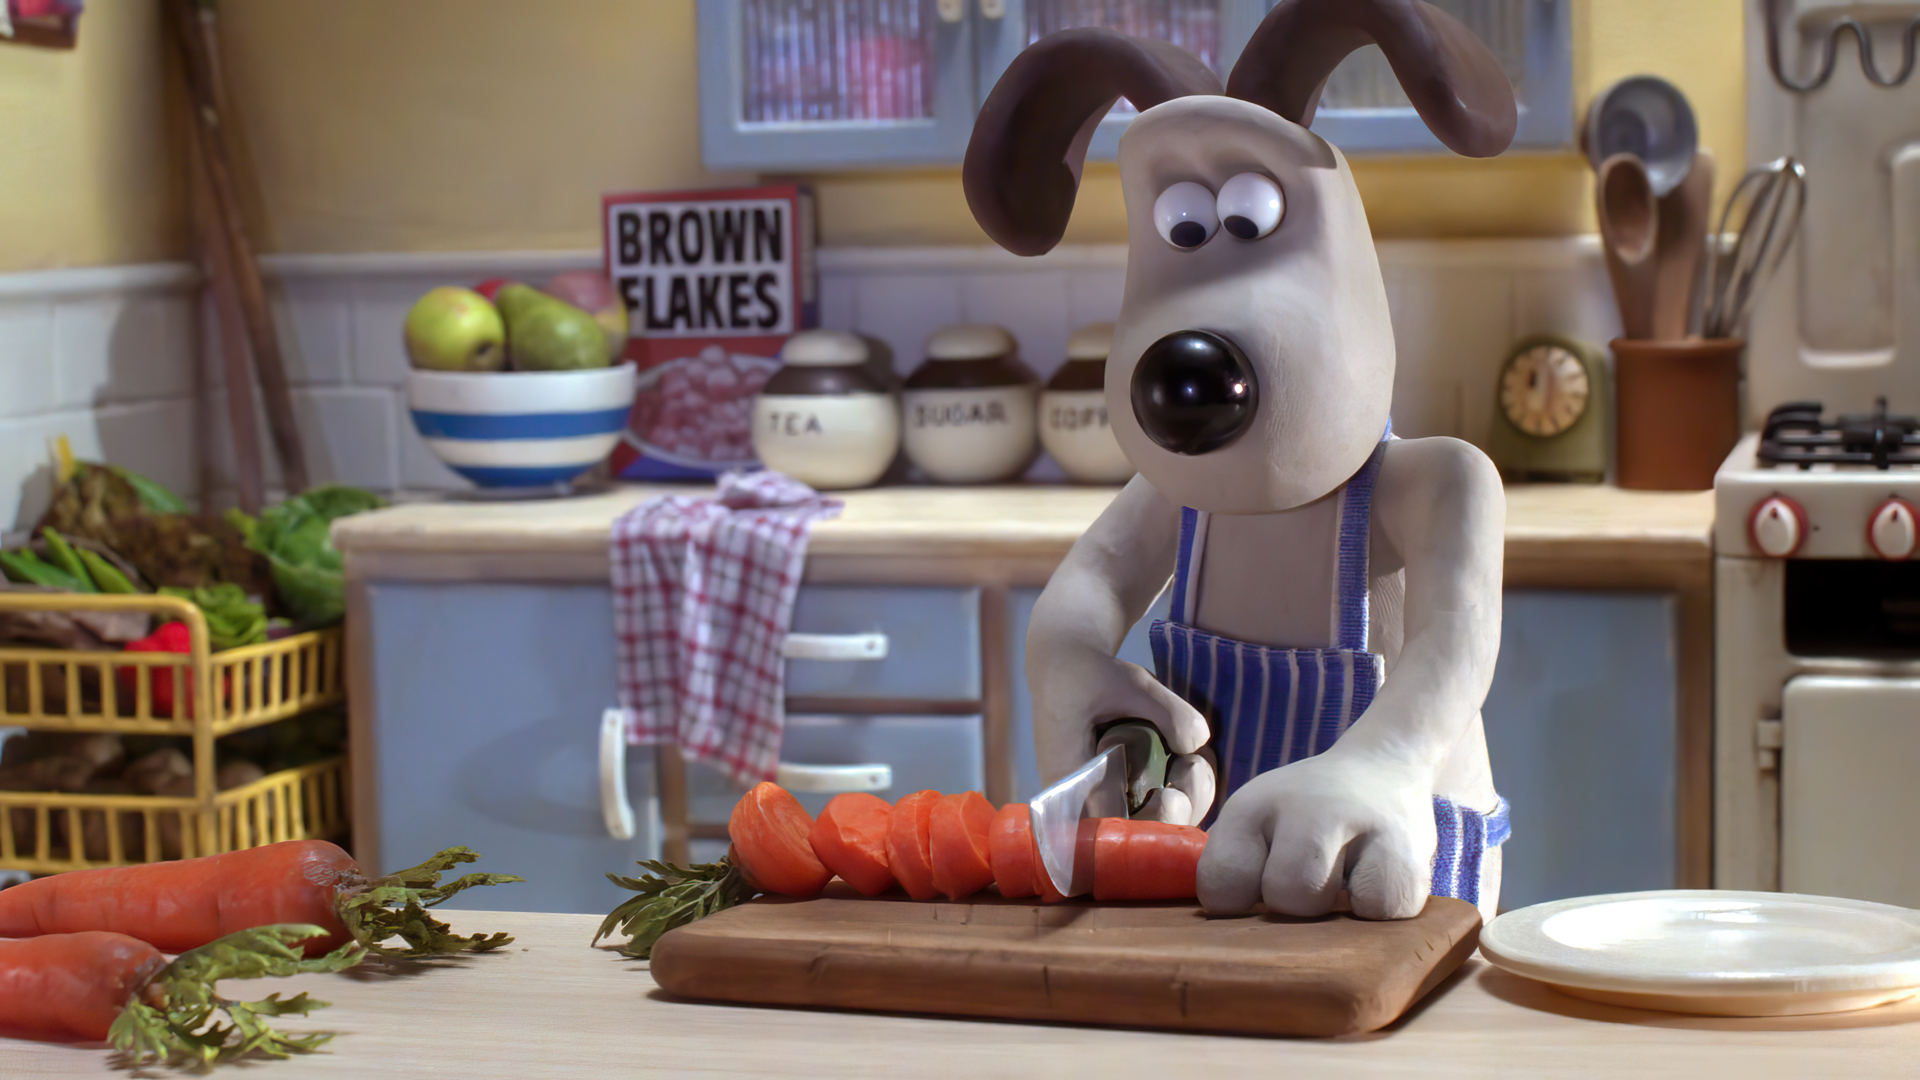 General 1920x1080 Wallace and Gromit The Curse of the Were-Rabbit movies film stills dog kitchen table knife carrots plates cooking animals food pear apples bowls oven towel stop motion vegetables